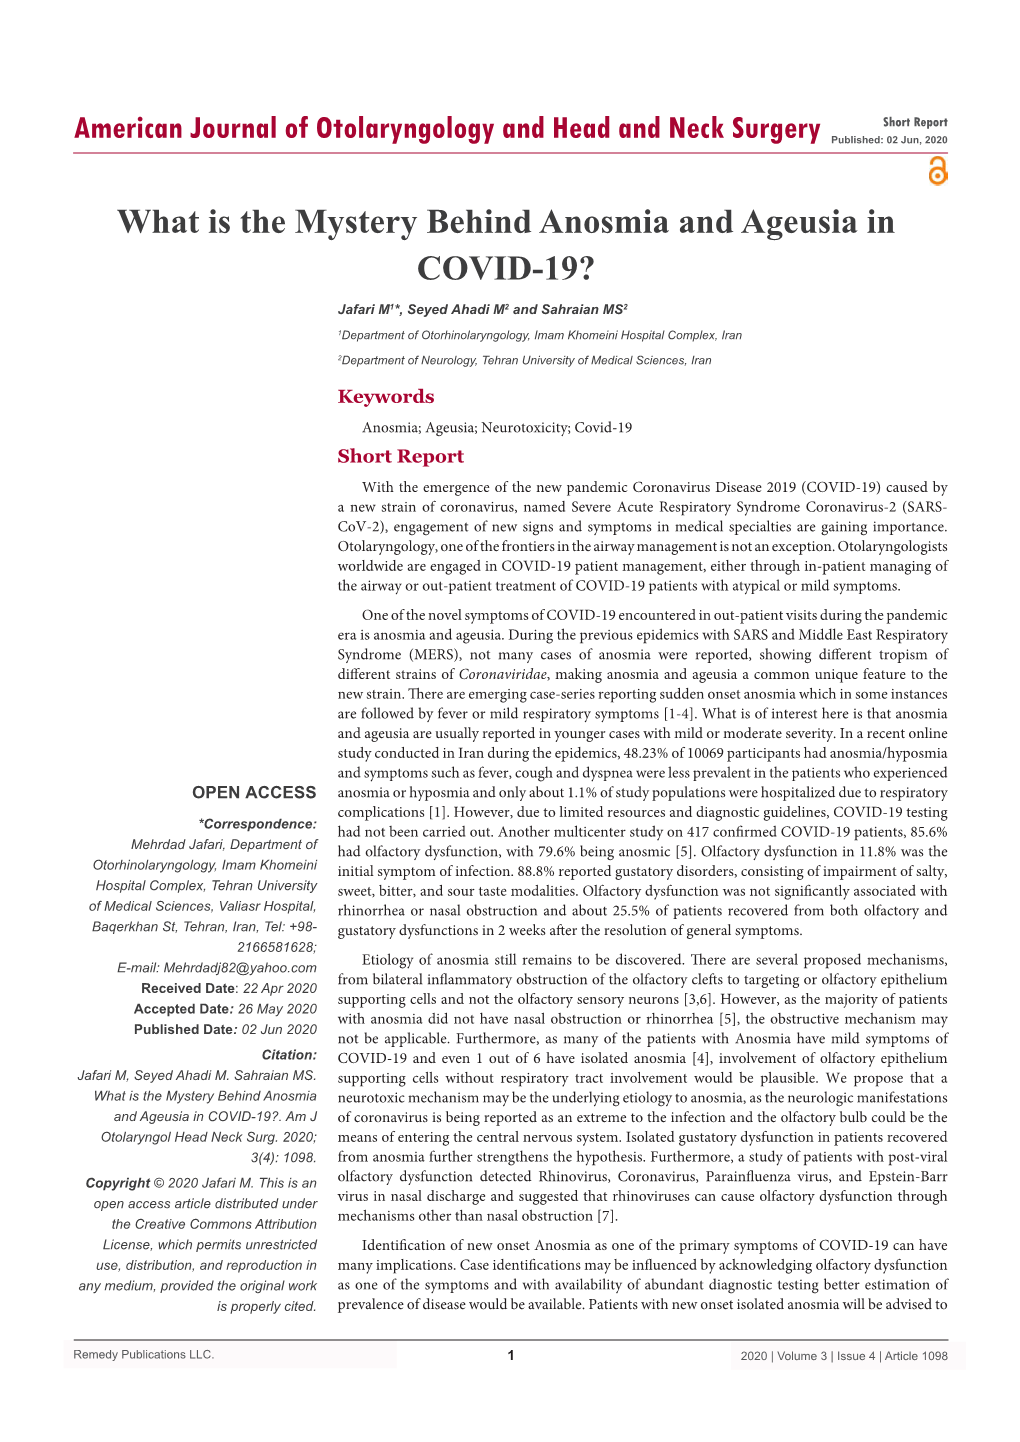 What Is the Mystery Behind Anosmia and Ageusia in COVID-19?